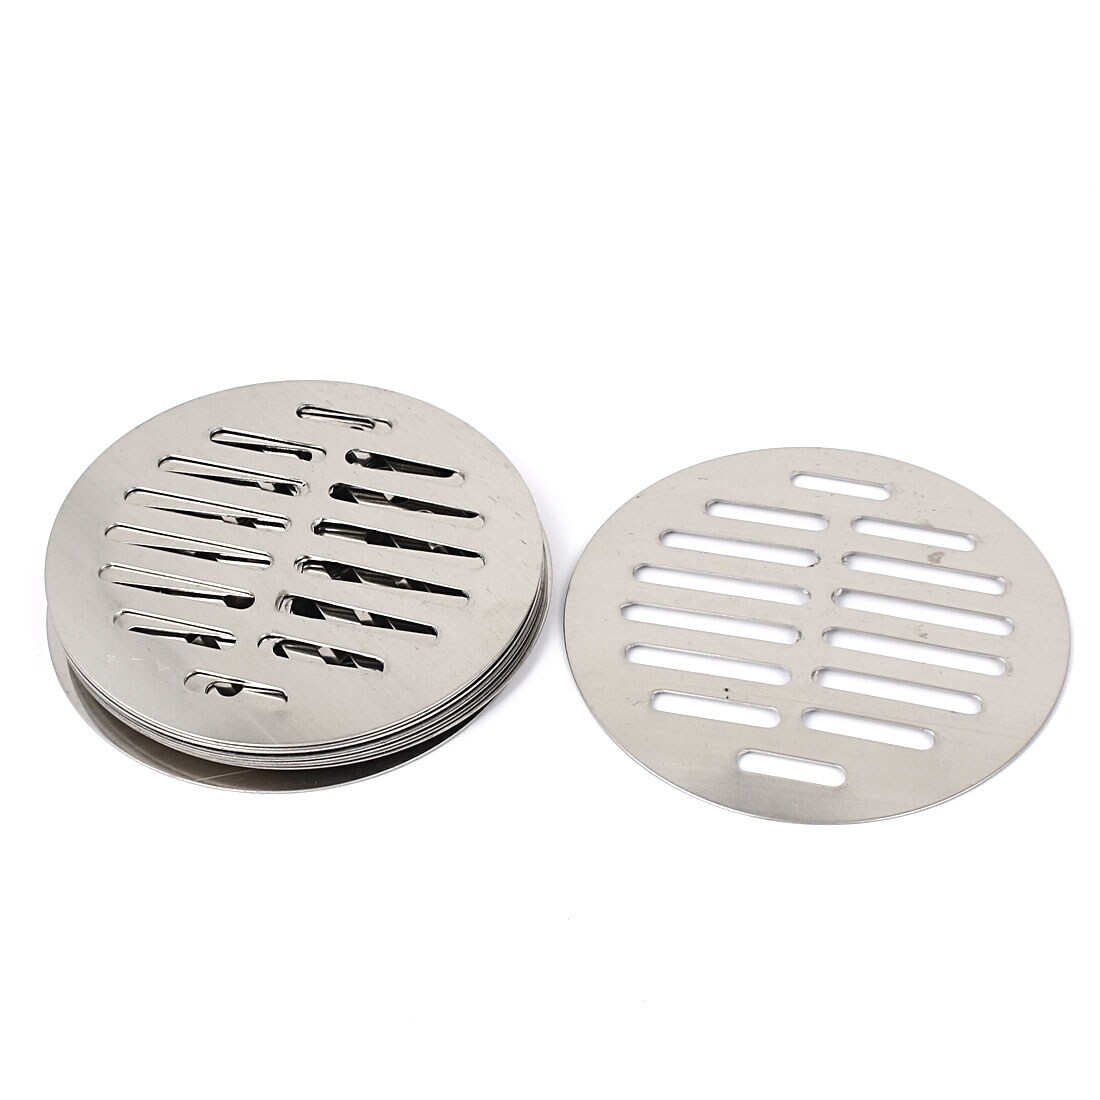 https://ak1.ostkcdn.com/images/products/is/images/direct/3d23504c2ff382343457c76f7383994759428a5e/Unique-Bargains-Stainless-Steel-Round-Sink-Floor-Drain-Strainer-Cover-4.5-Inch-Dia-10pcs.jpg